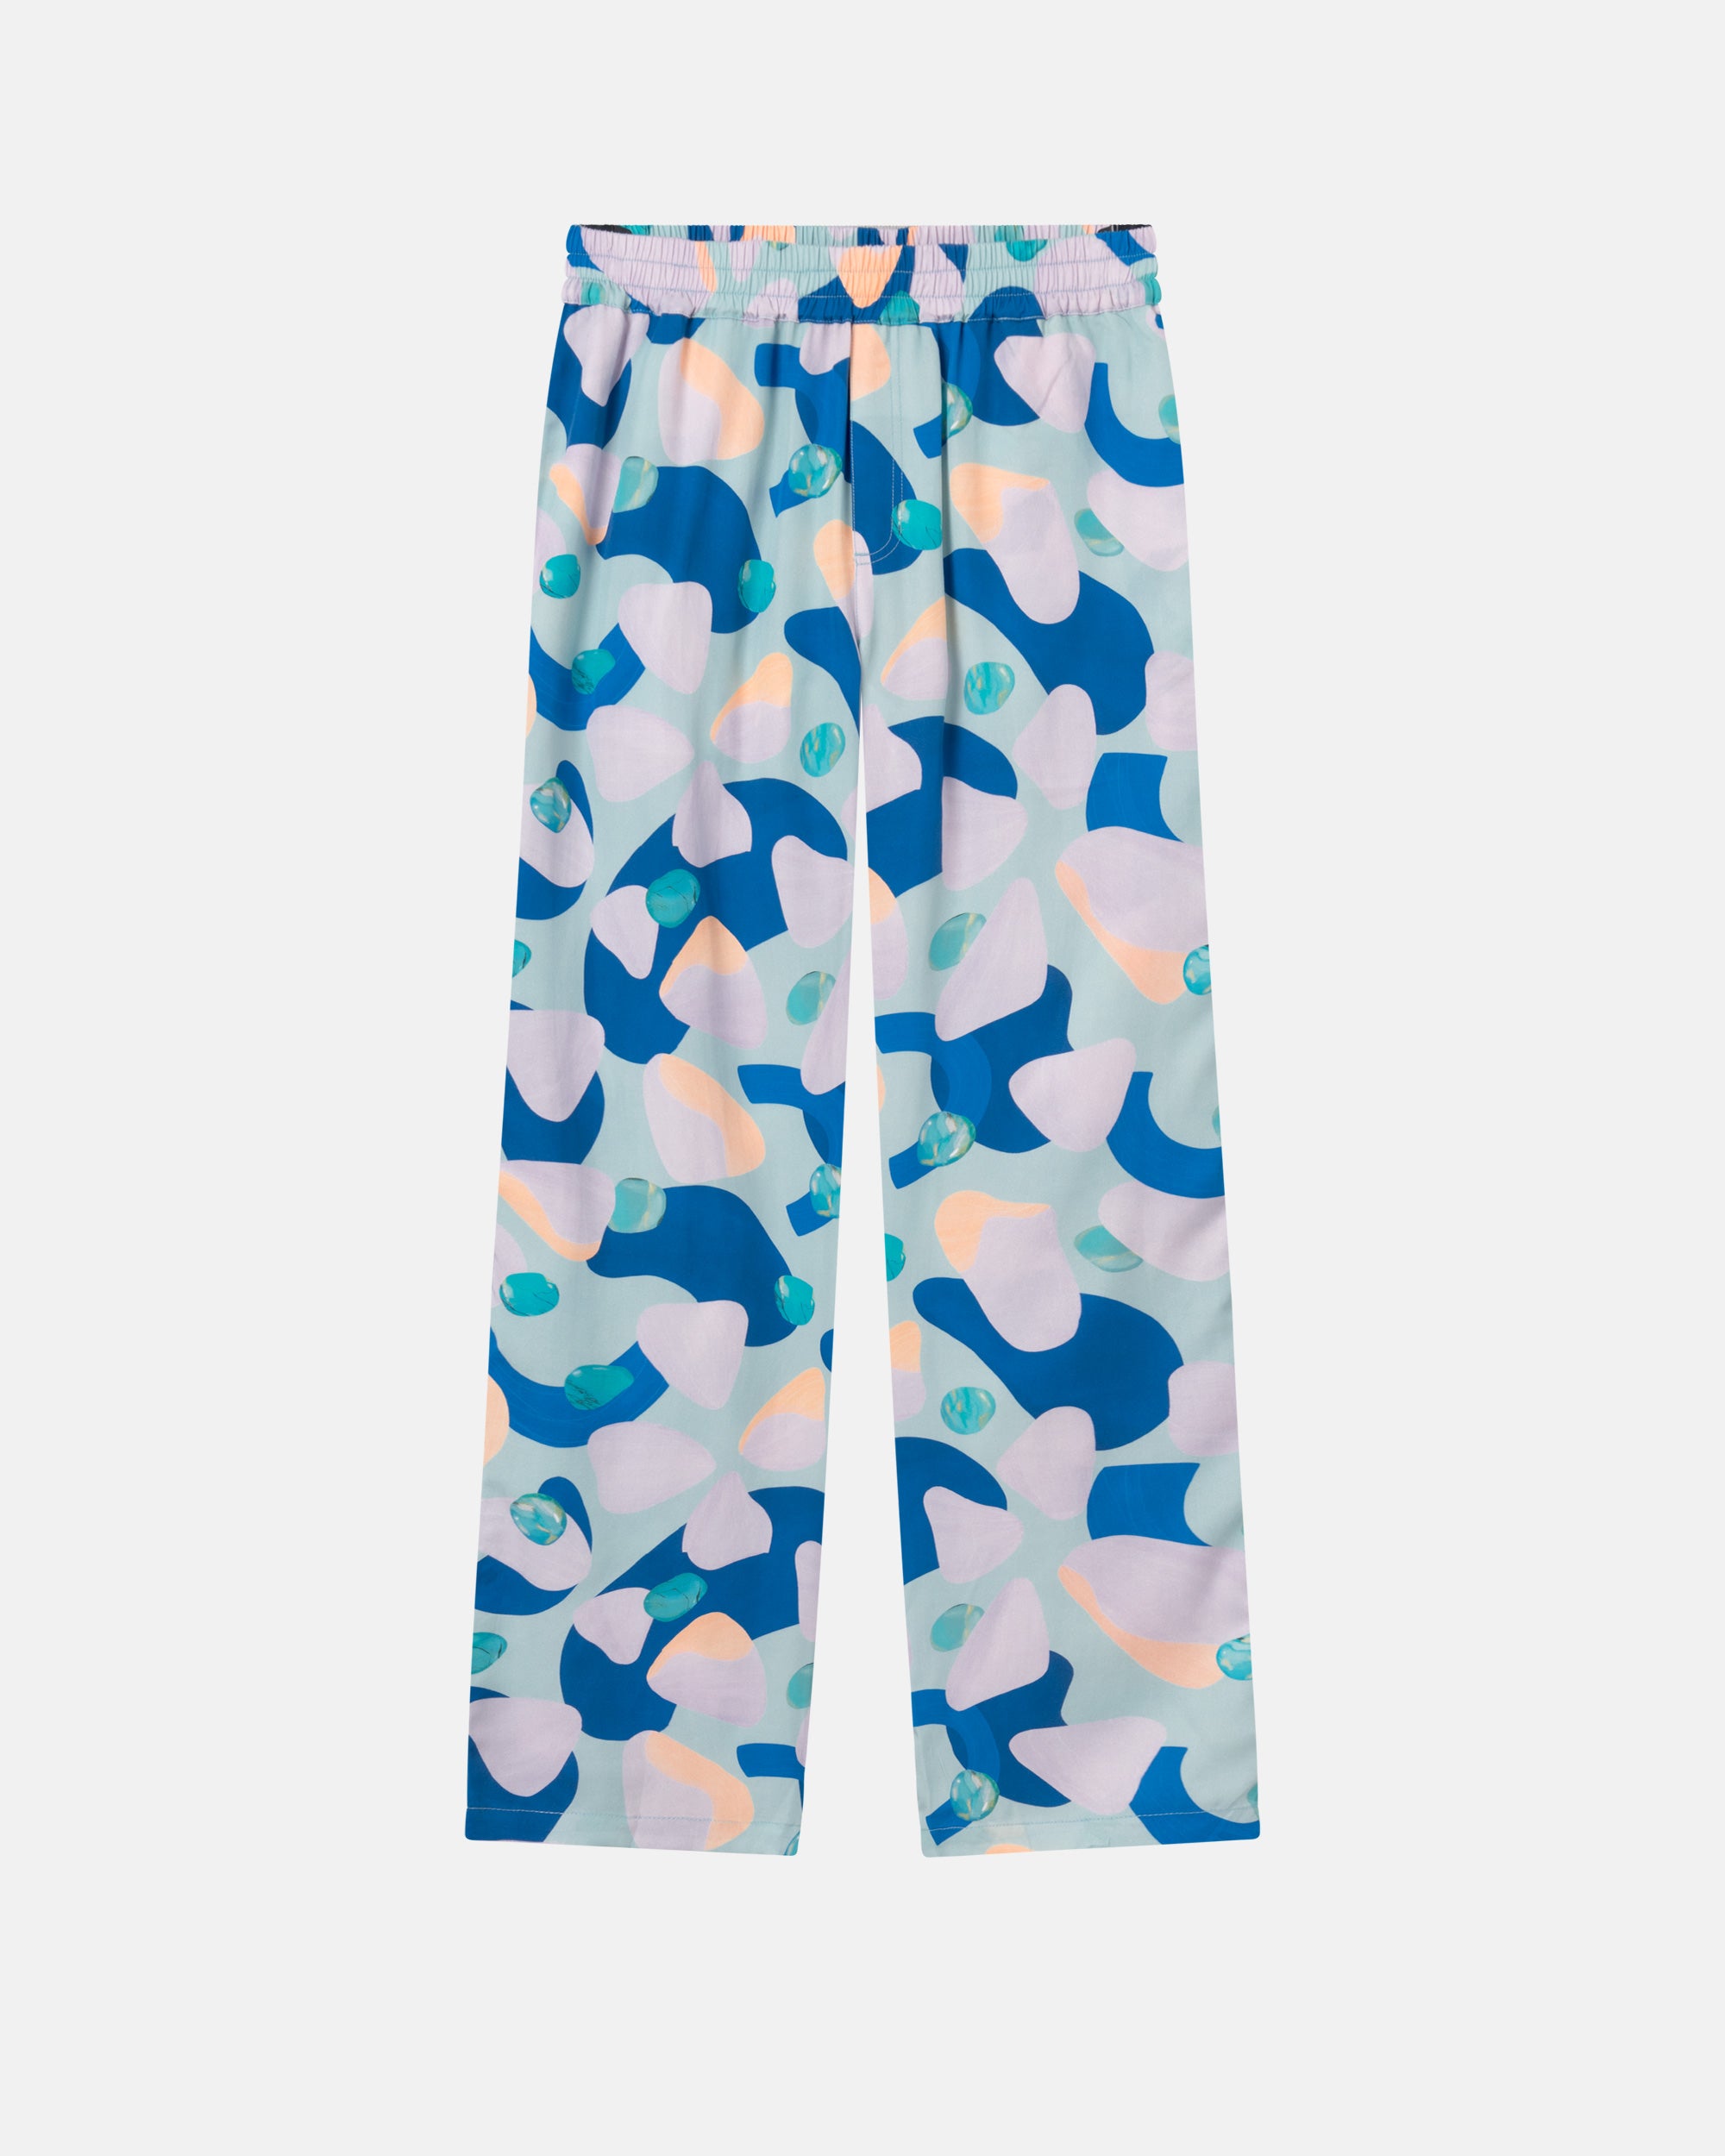 Vacation pants with a multi-colored graphic pattern, two front pockets, and an elastic drawstring.